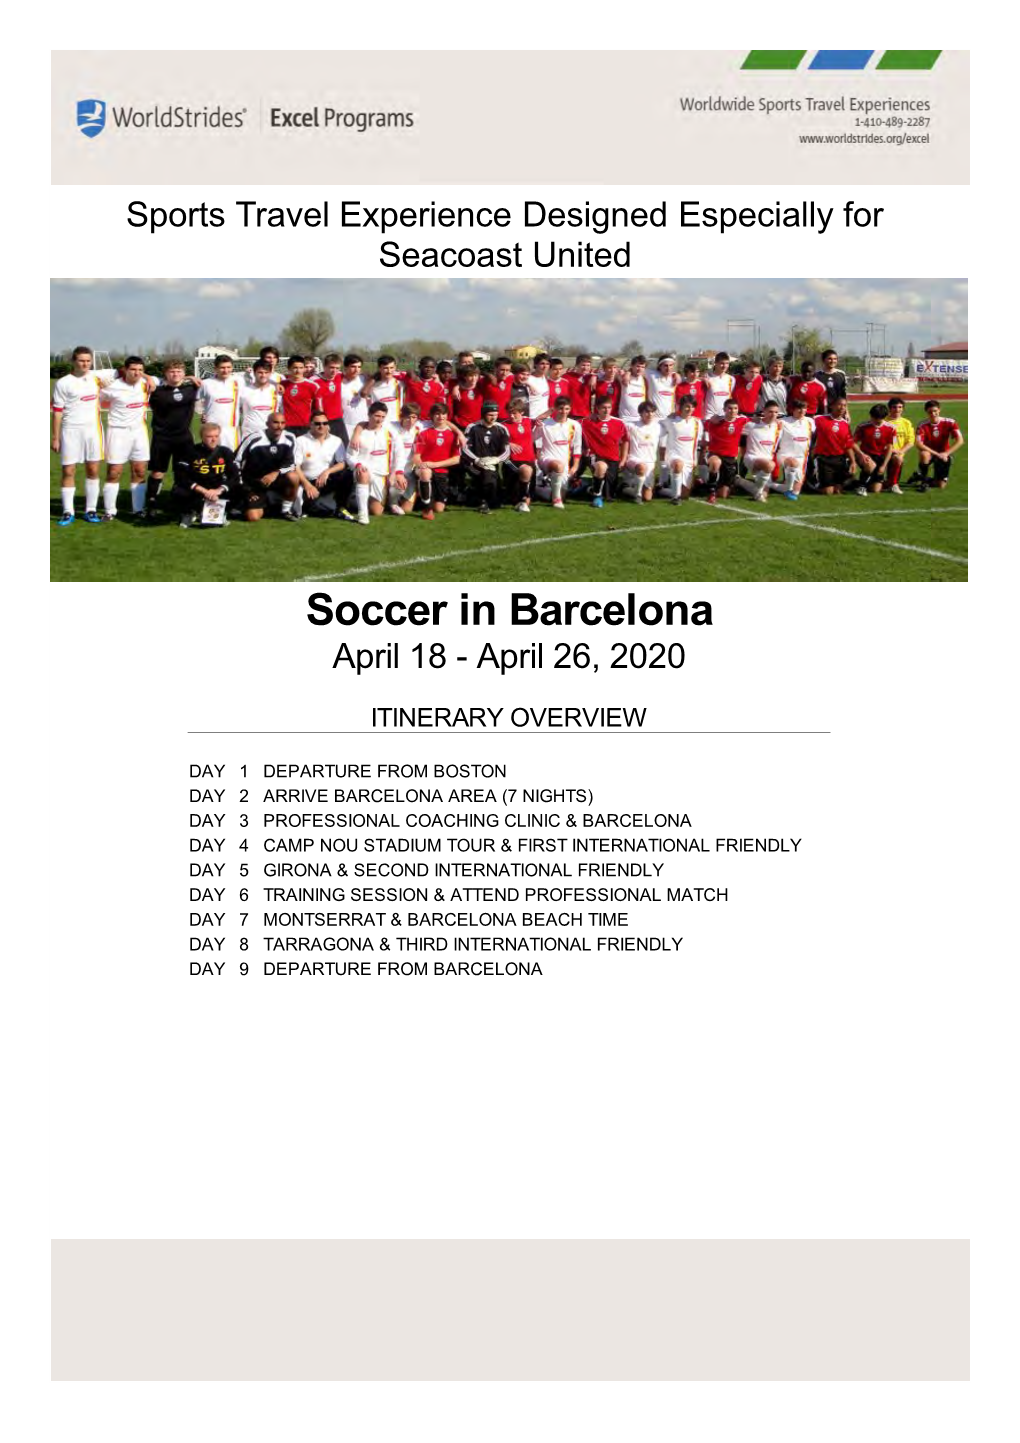 Soccer in Barcelona April 18 - April 26, 2020 ITINERARY OVERVIEW